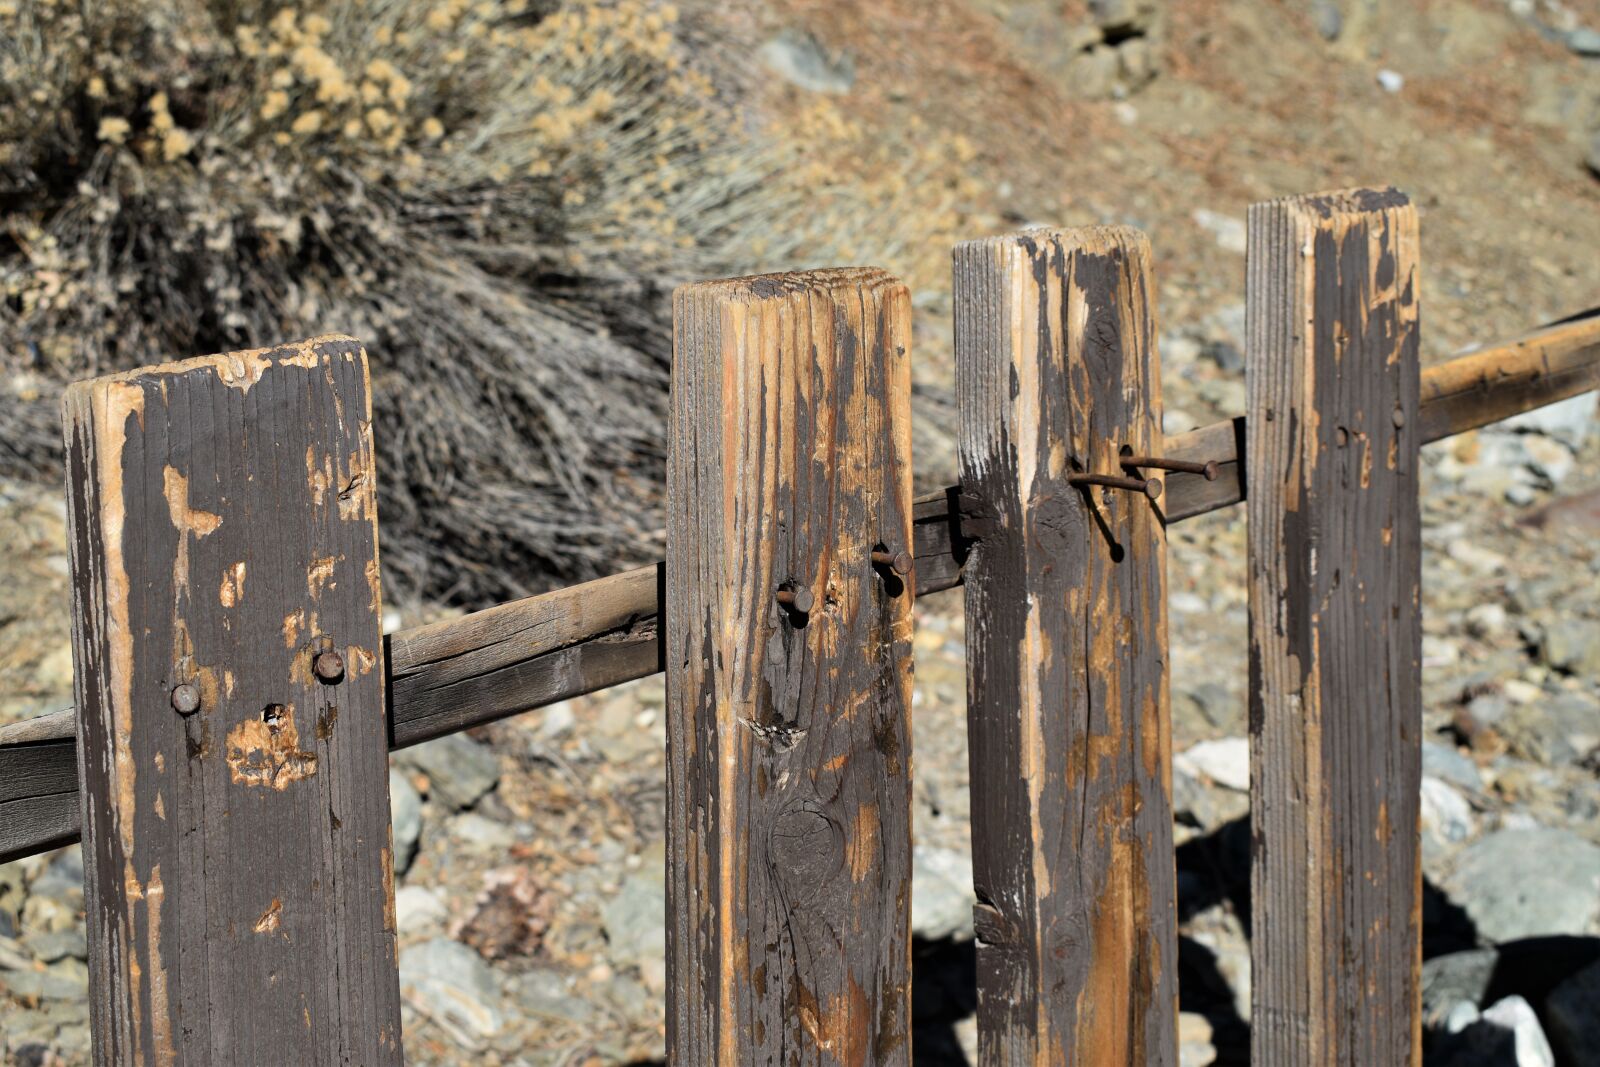 Nikon D3500 sample photo. Fence, rustic, outdoor photography